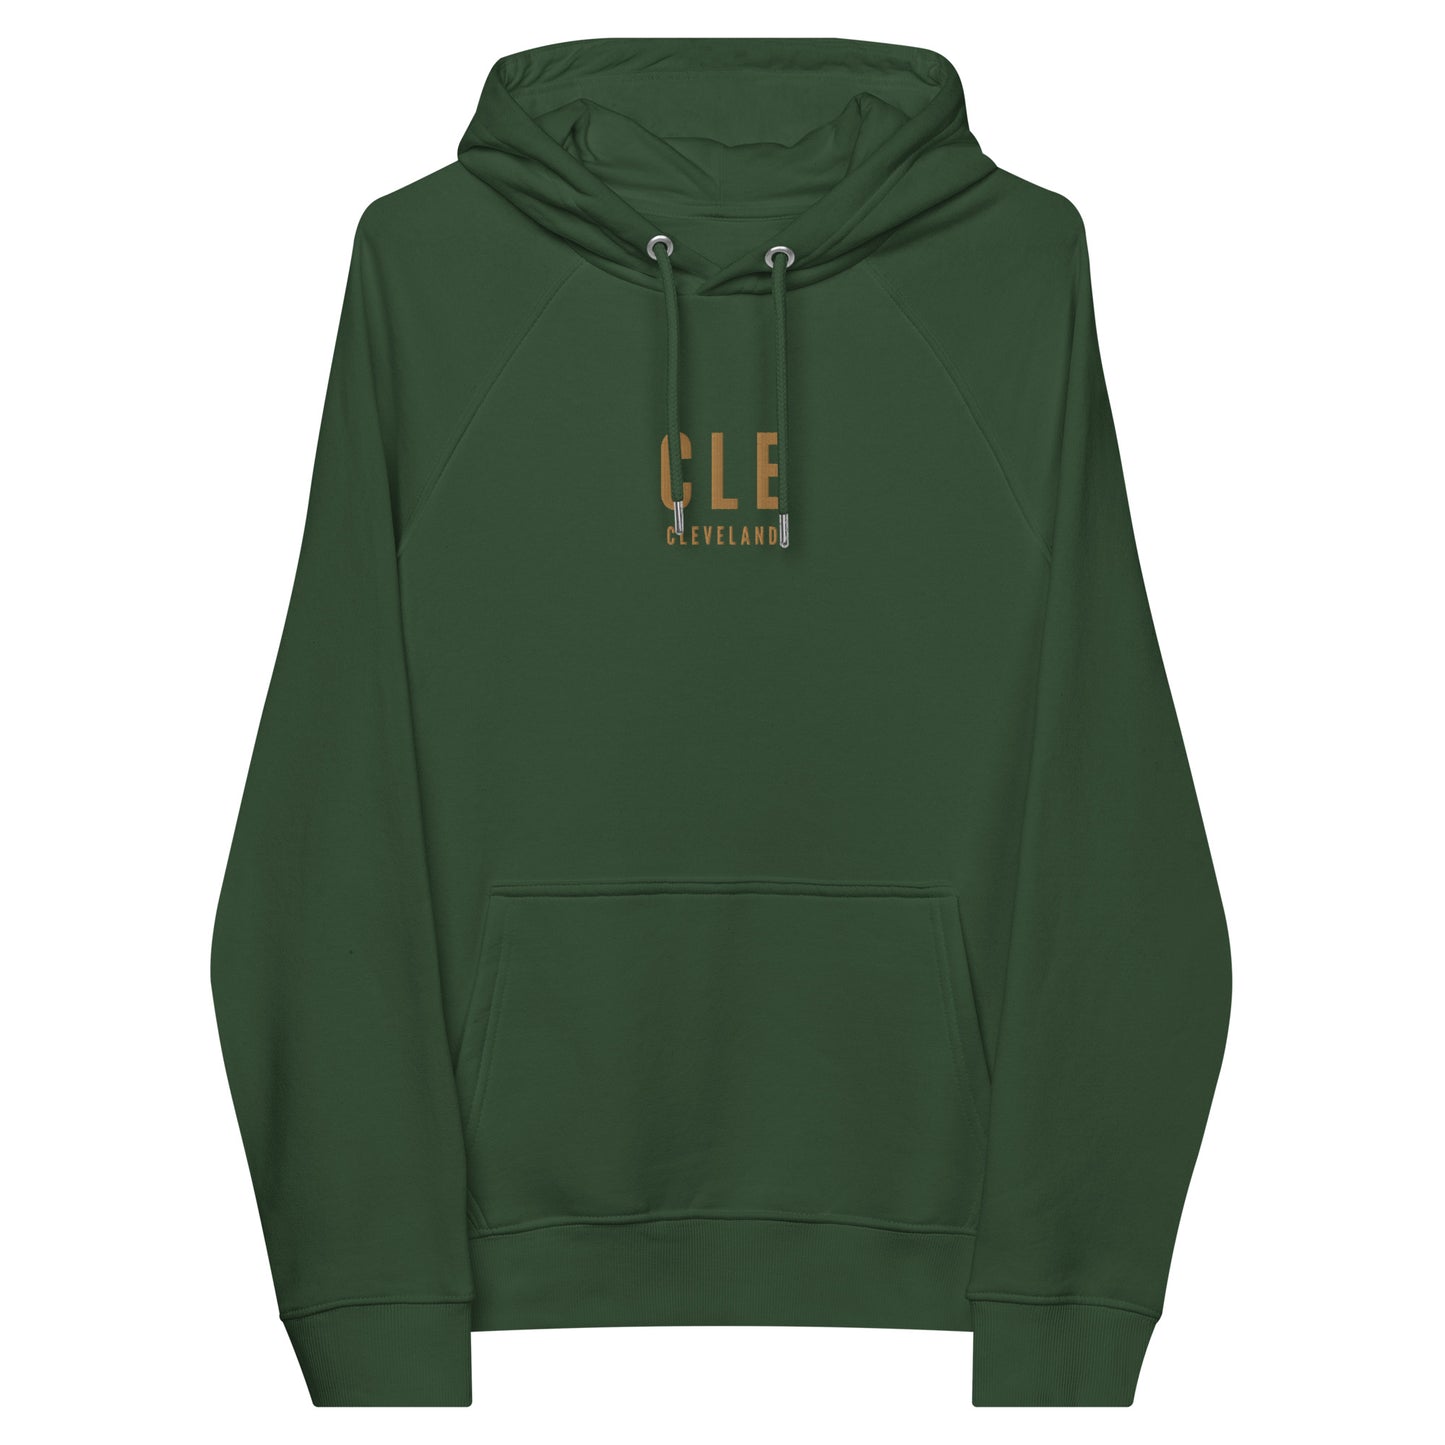 City Organic Hoodie - Old Gold • CLE Cleveland • YHM Designs - Image 08